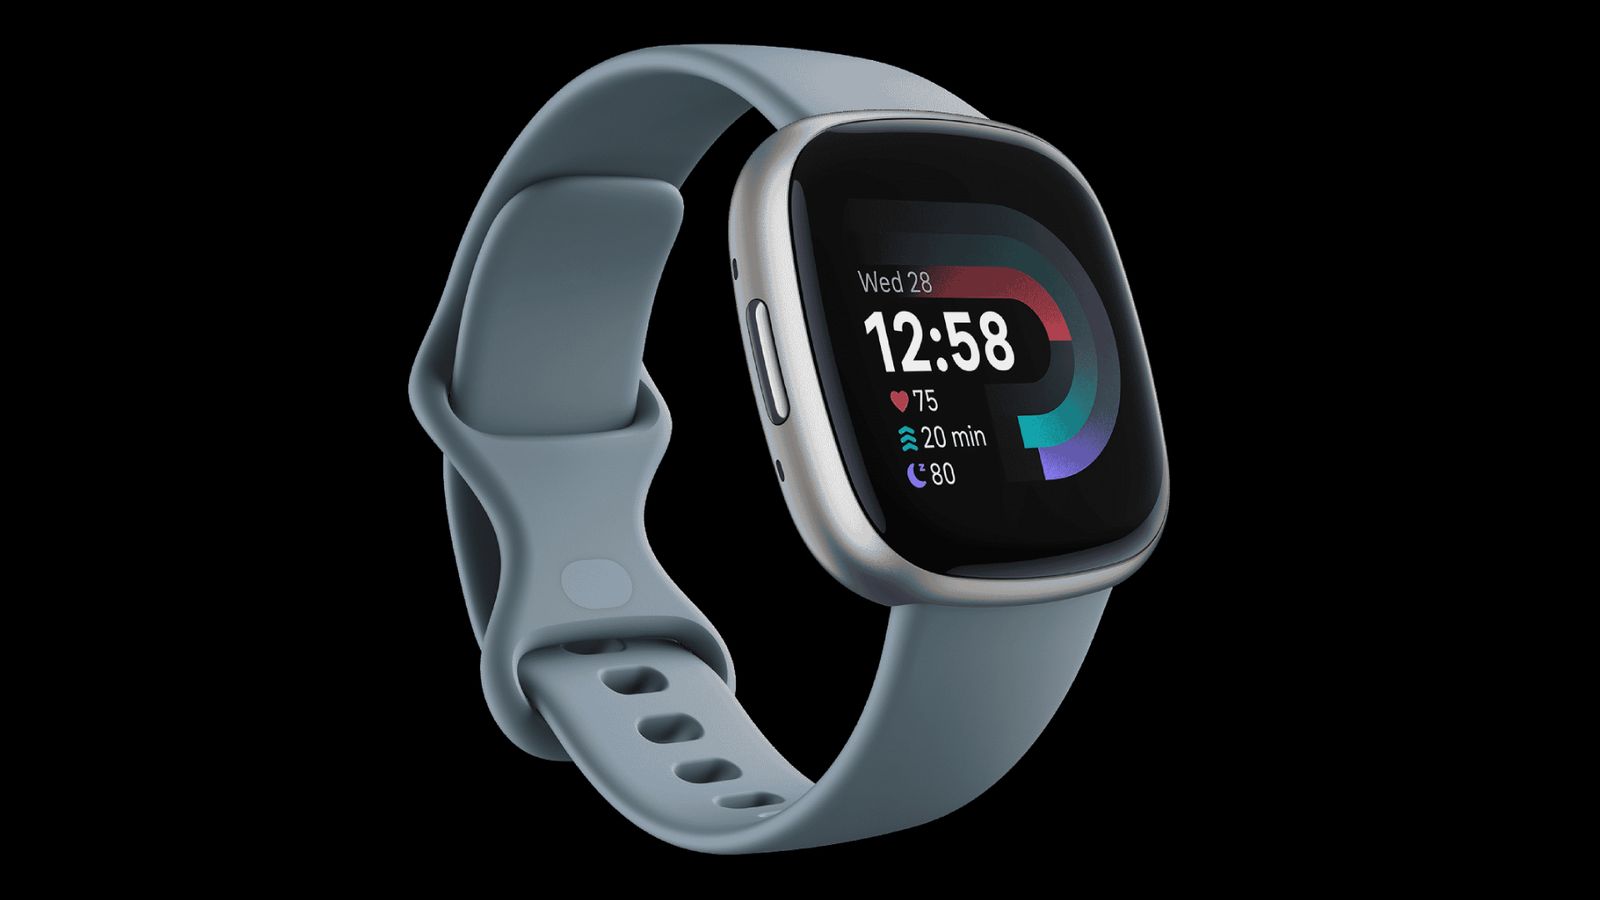 Fitbit Versa 4 product image of a platinum smartwatch with a black watch face and waterfall blue strap.